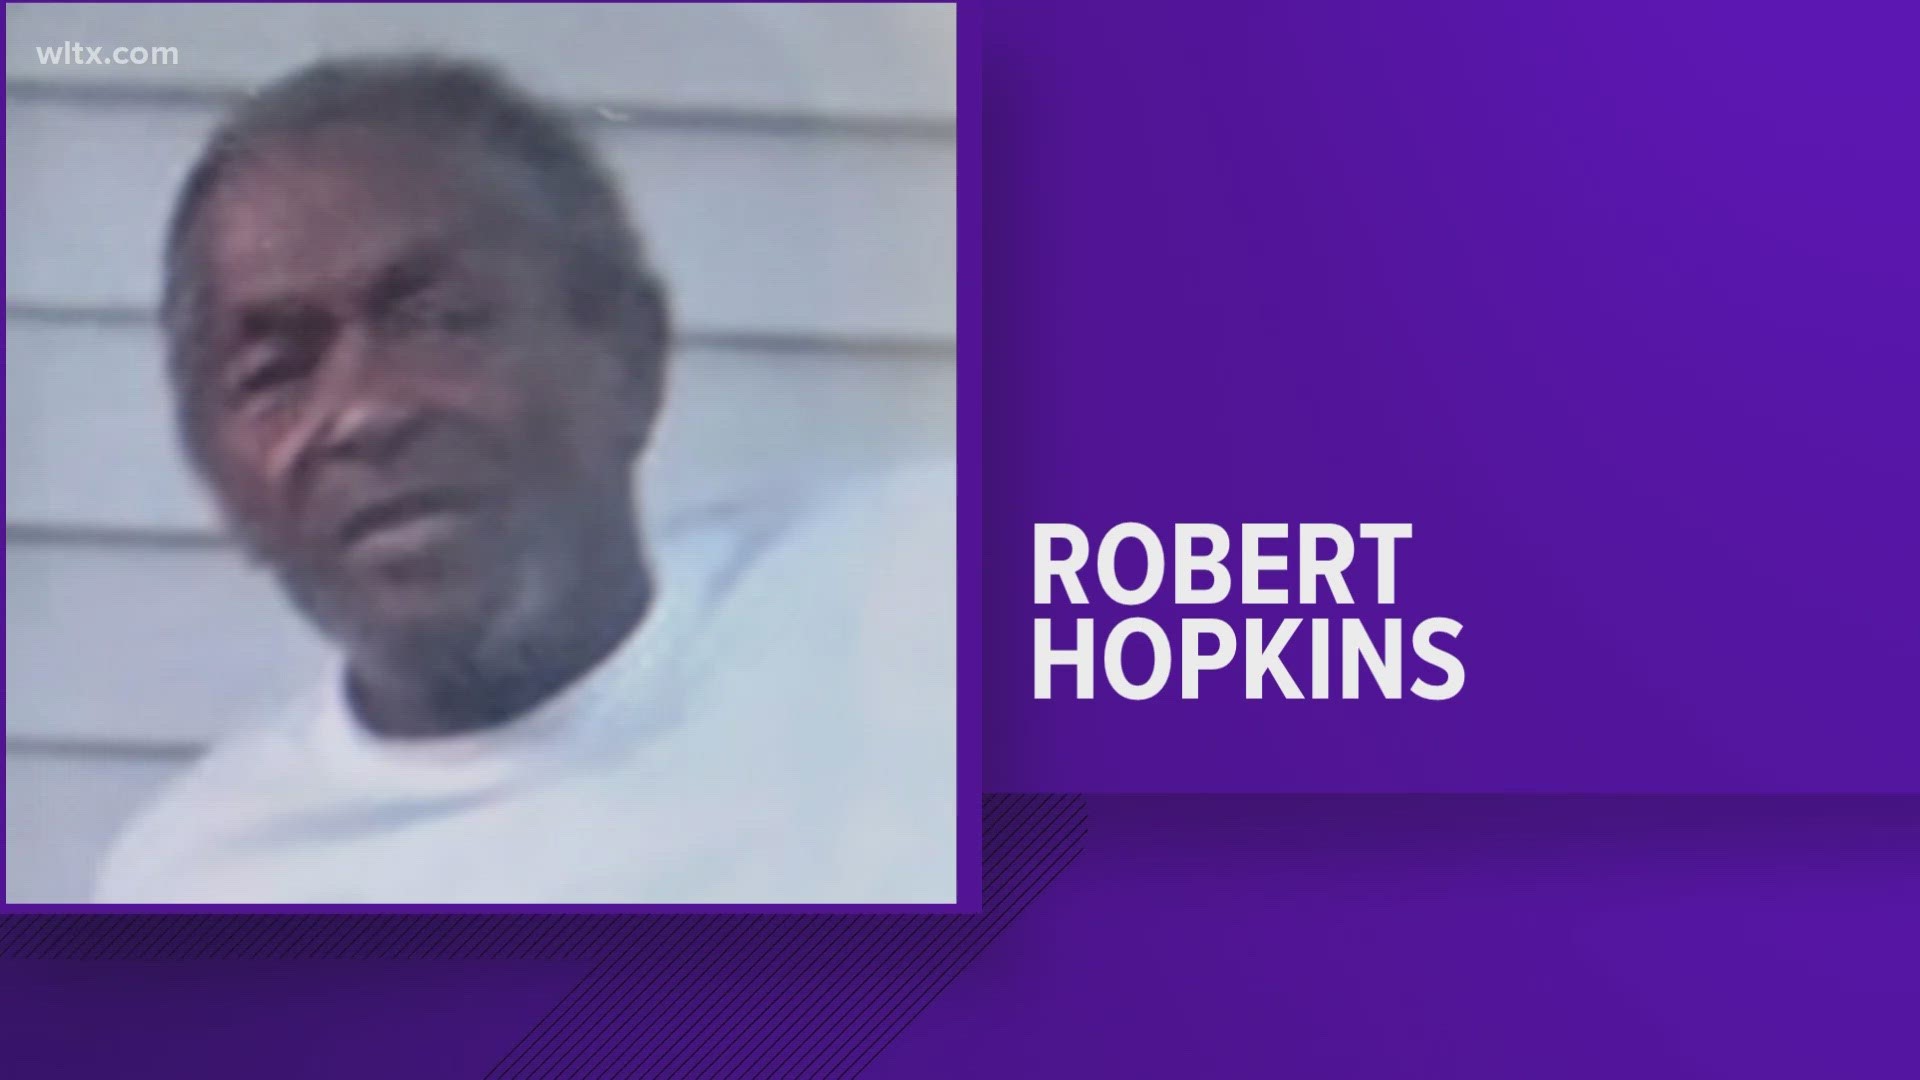 Robert Hopkins, 80, was last seen around 8 a.m. Wednesday at his home at Austin Woods Apartments